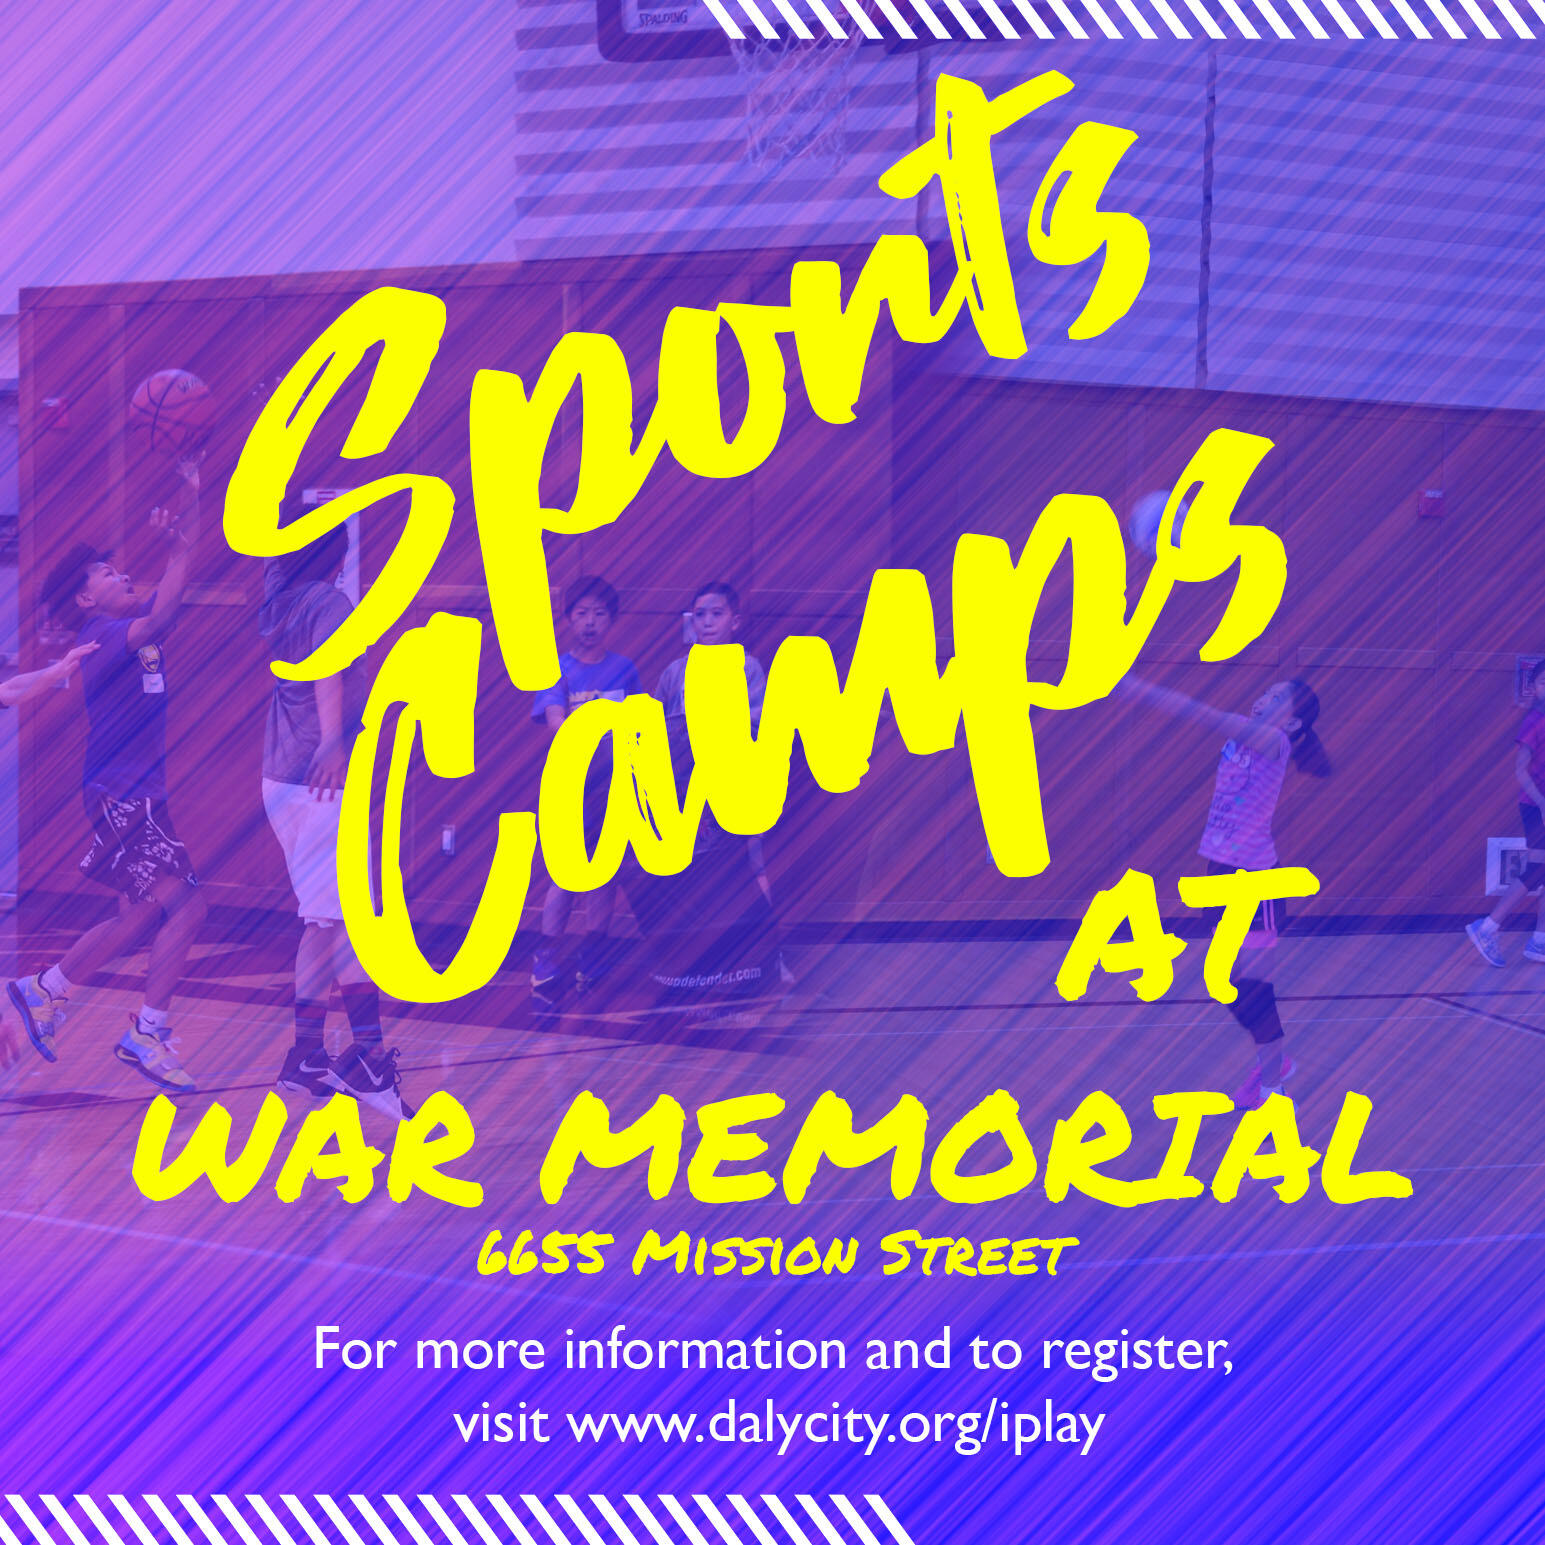 Register your child for Sports Camps at War Memorial Community Center